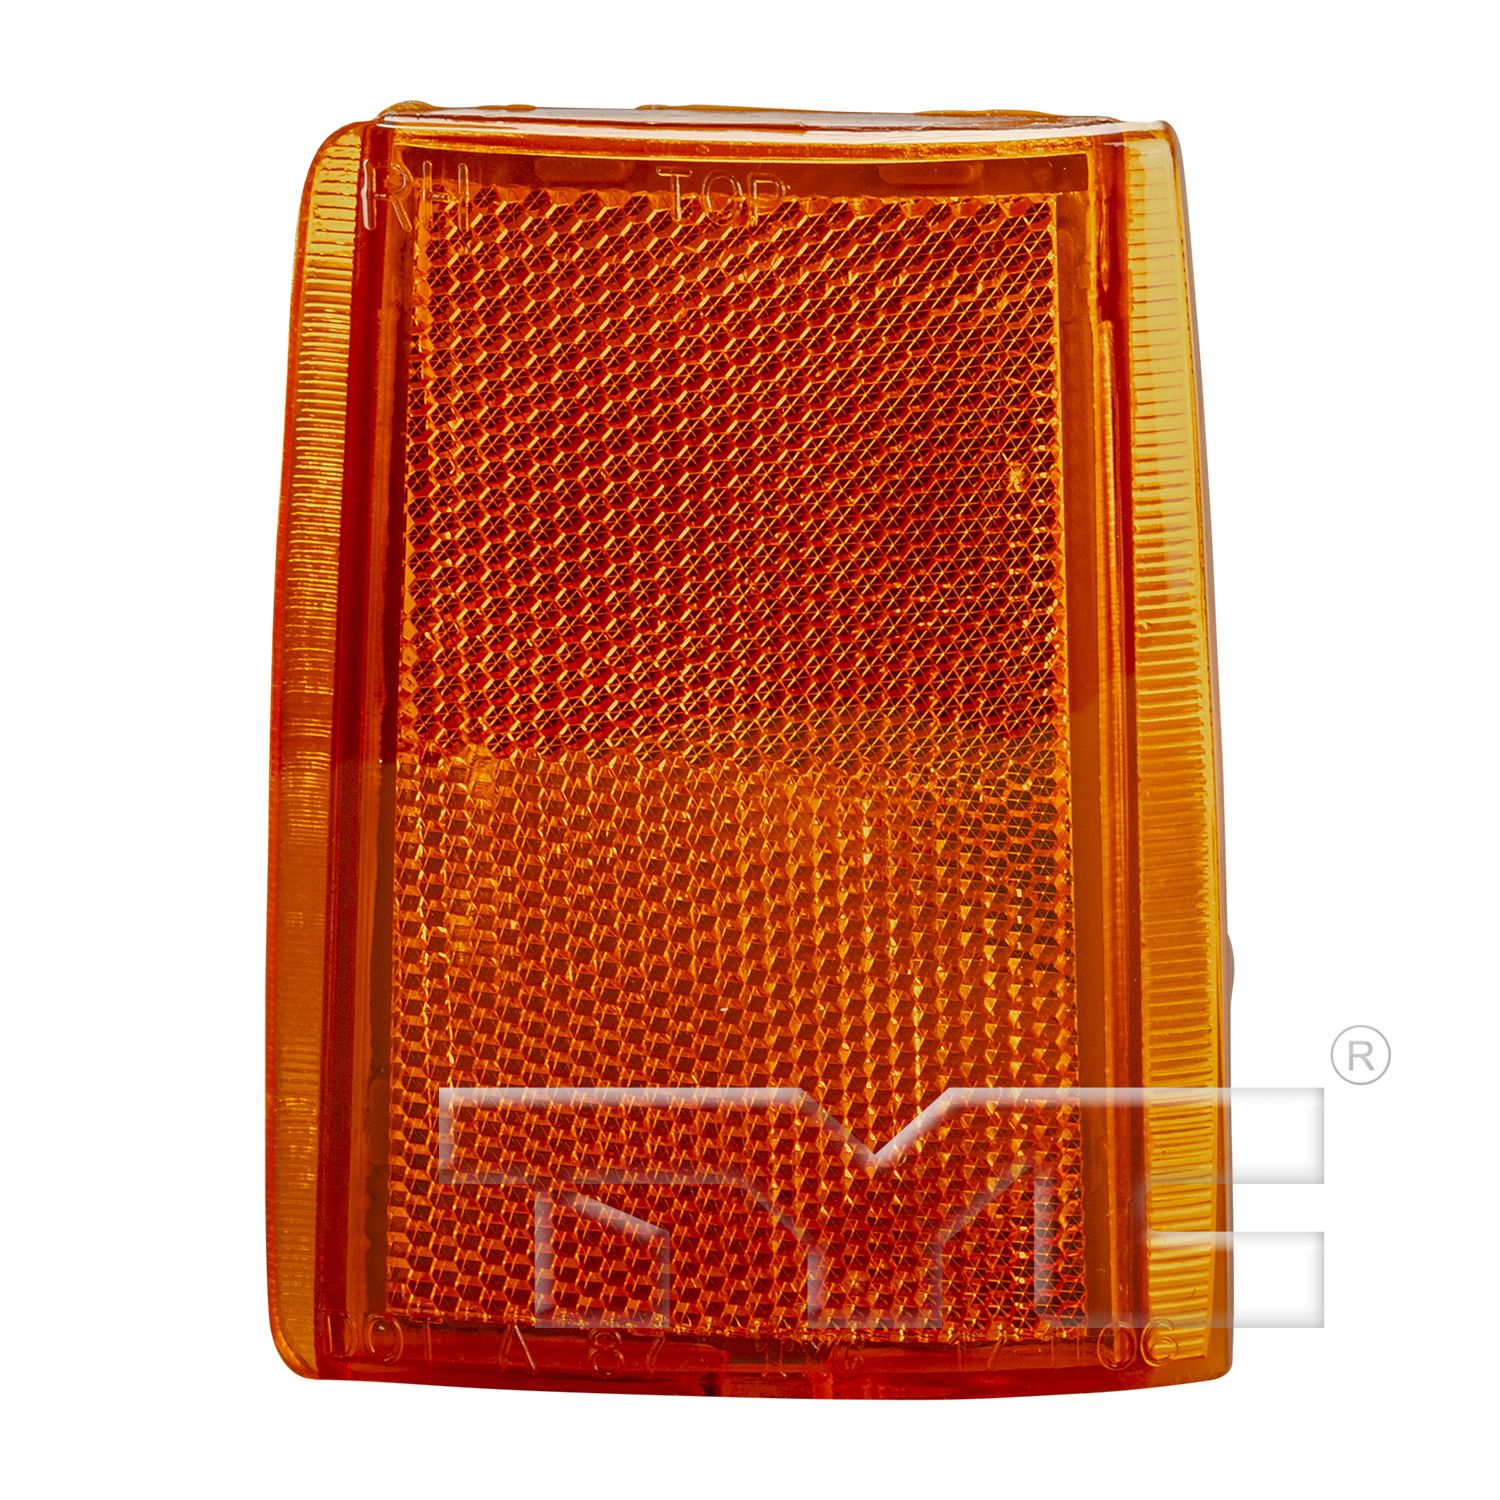 Aftermarket LAMPS for CHEVROLET - K1500 SUBURBAN, K1500 SUBURBAN,92-93,RT Front side reflector